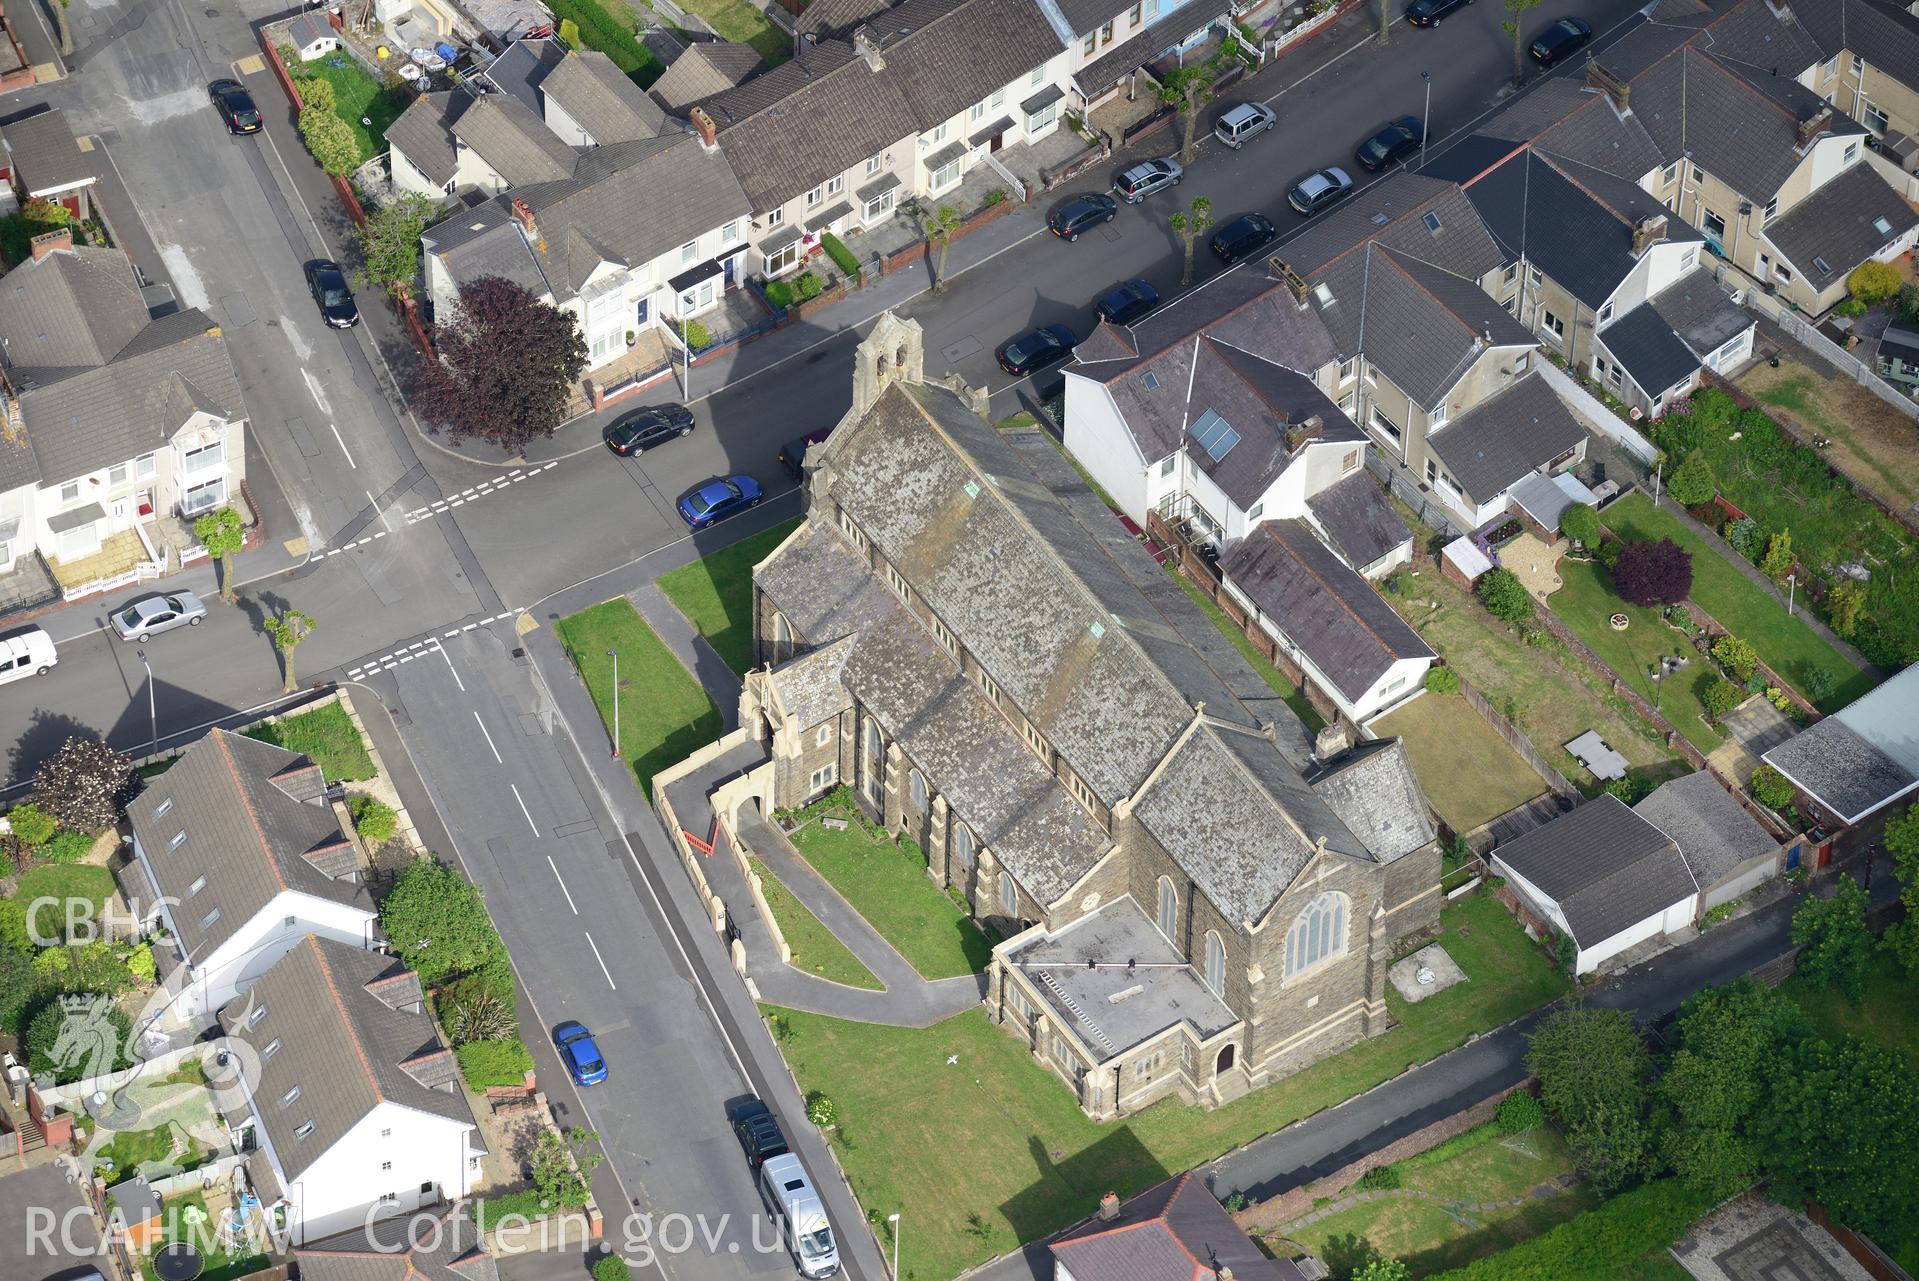 St. Alban's Church, Llanelli. Oblique aerial photograph taken during the Royal Commission's programme of archaeological aerial reconnaissance by Toby Driver on 19th June 2015.